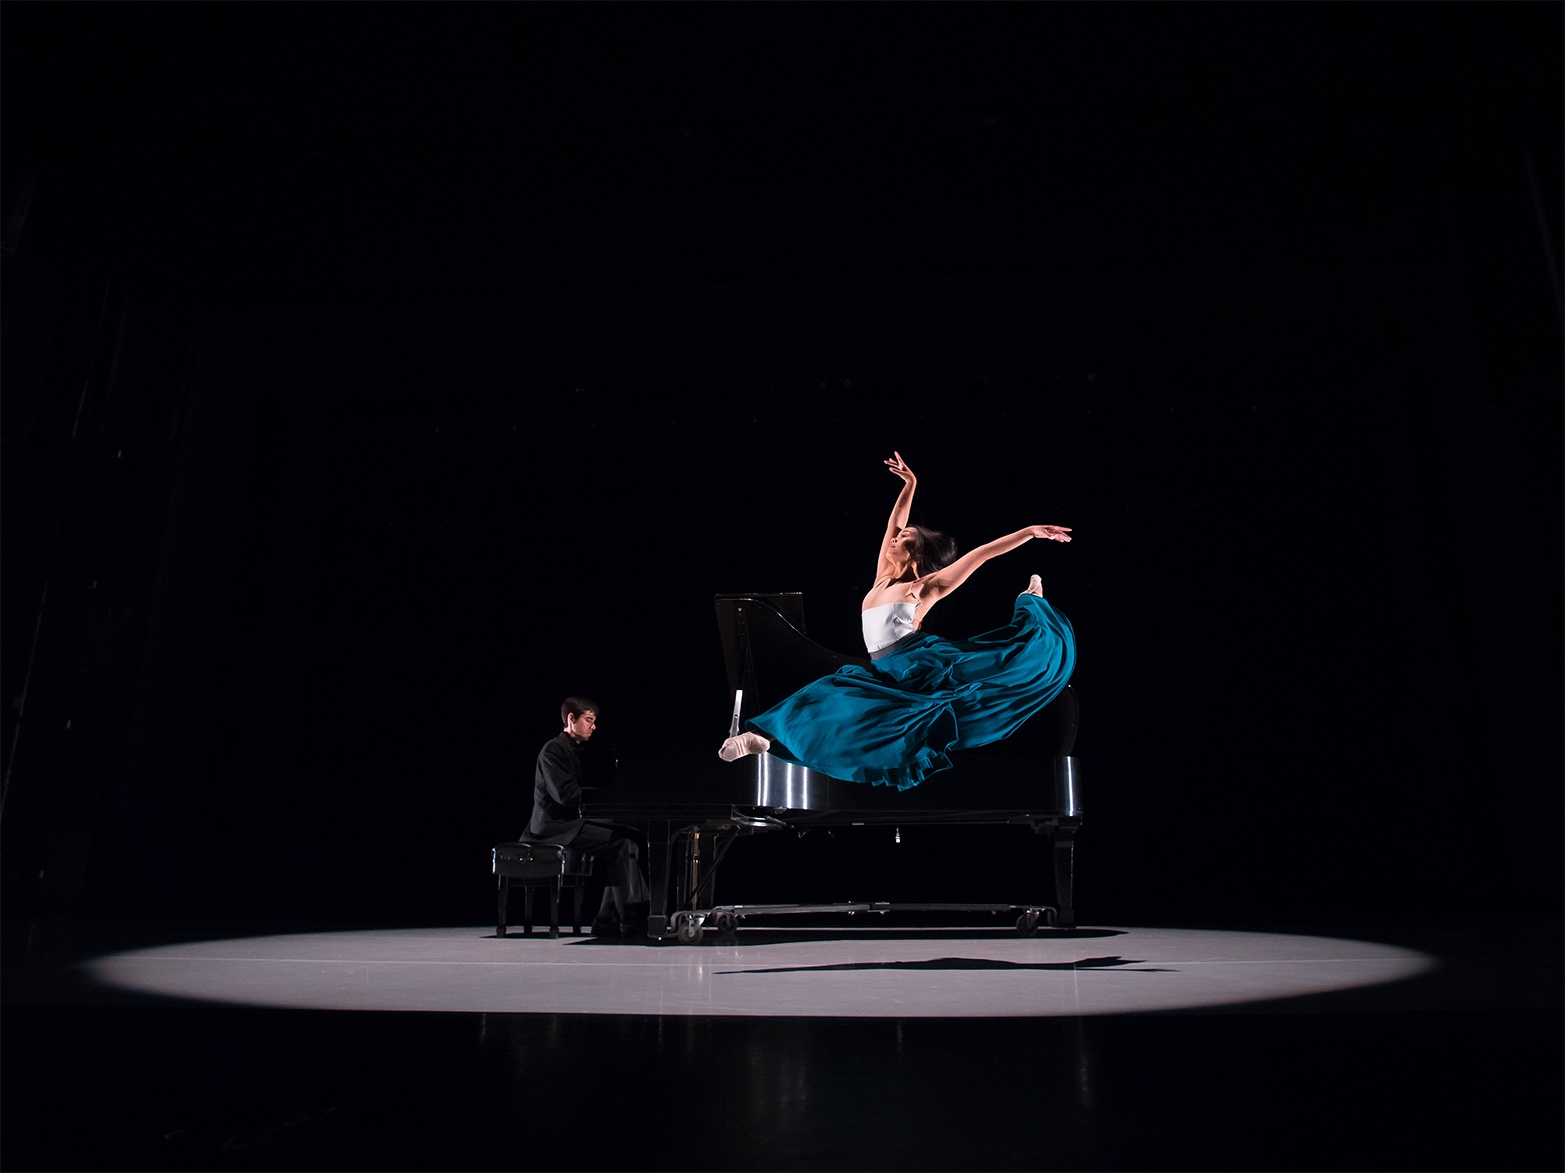 Dancer leaps into air as a Pianist plays music. Photo by Gre